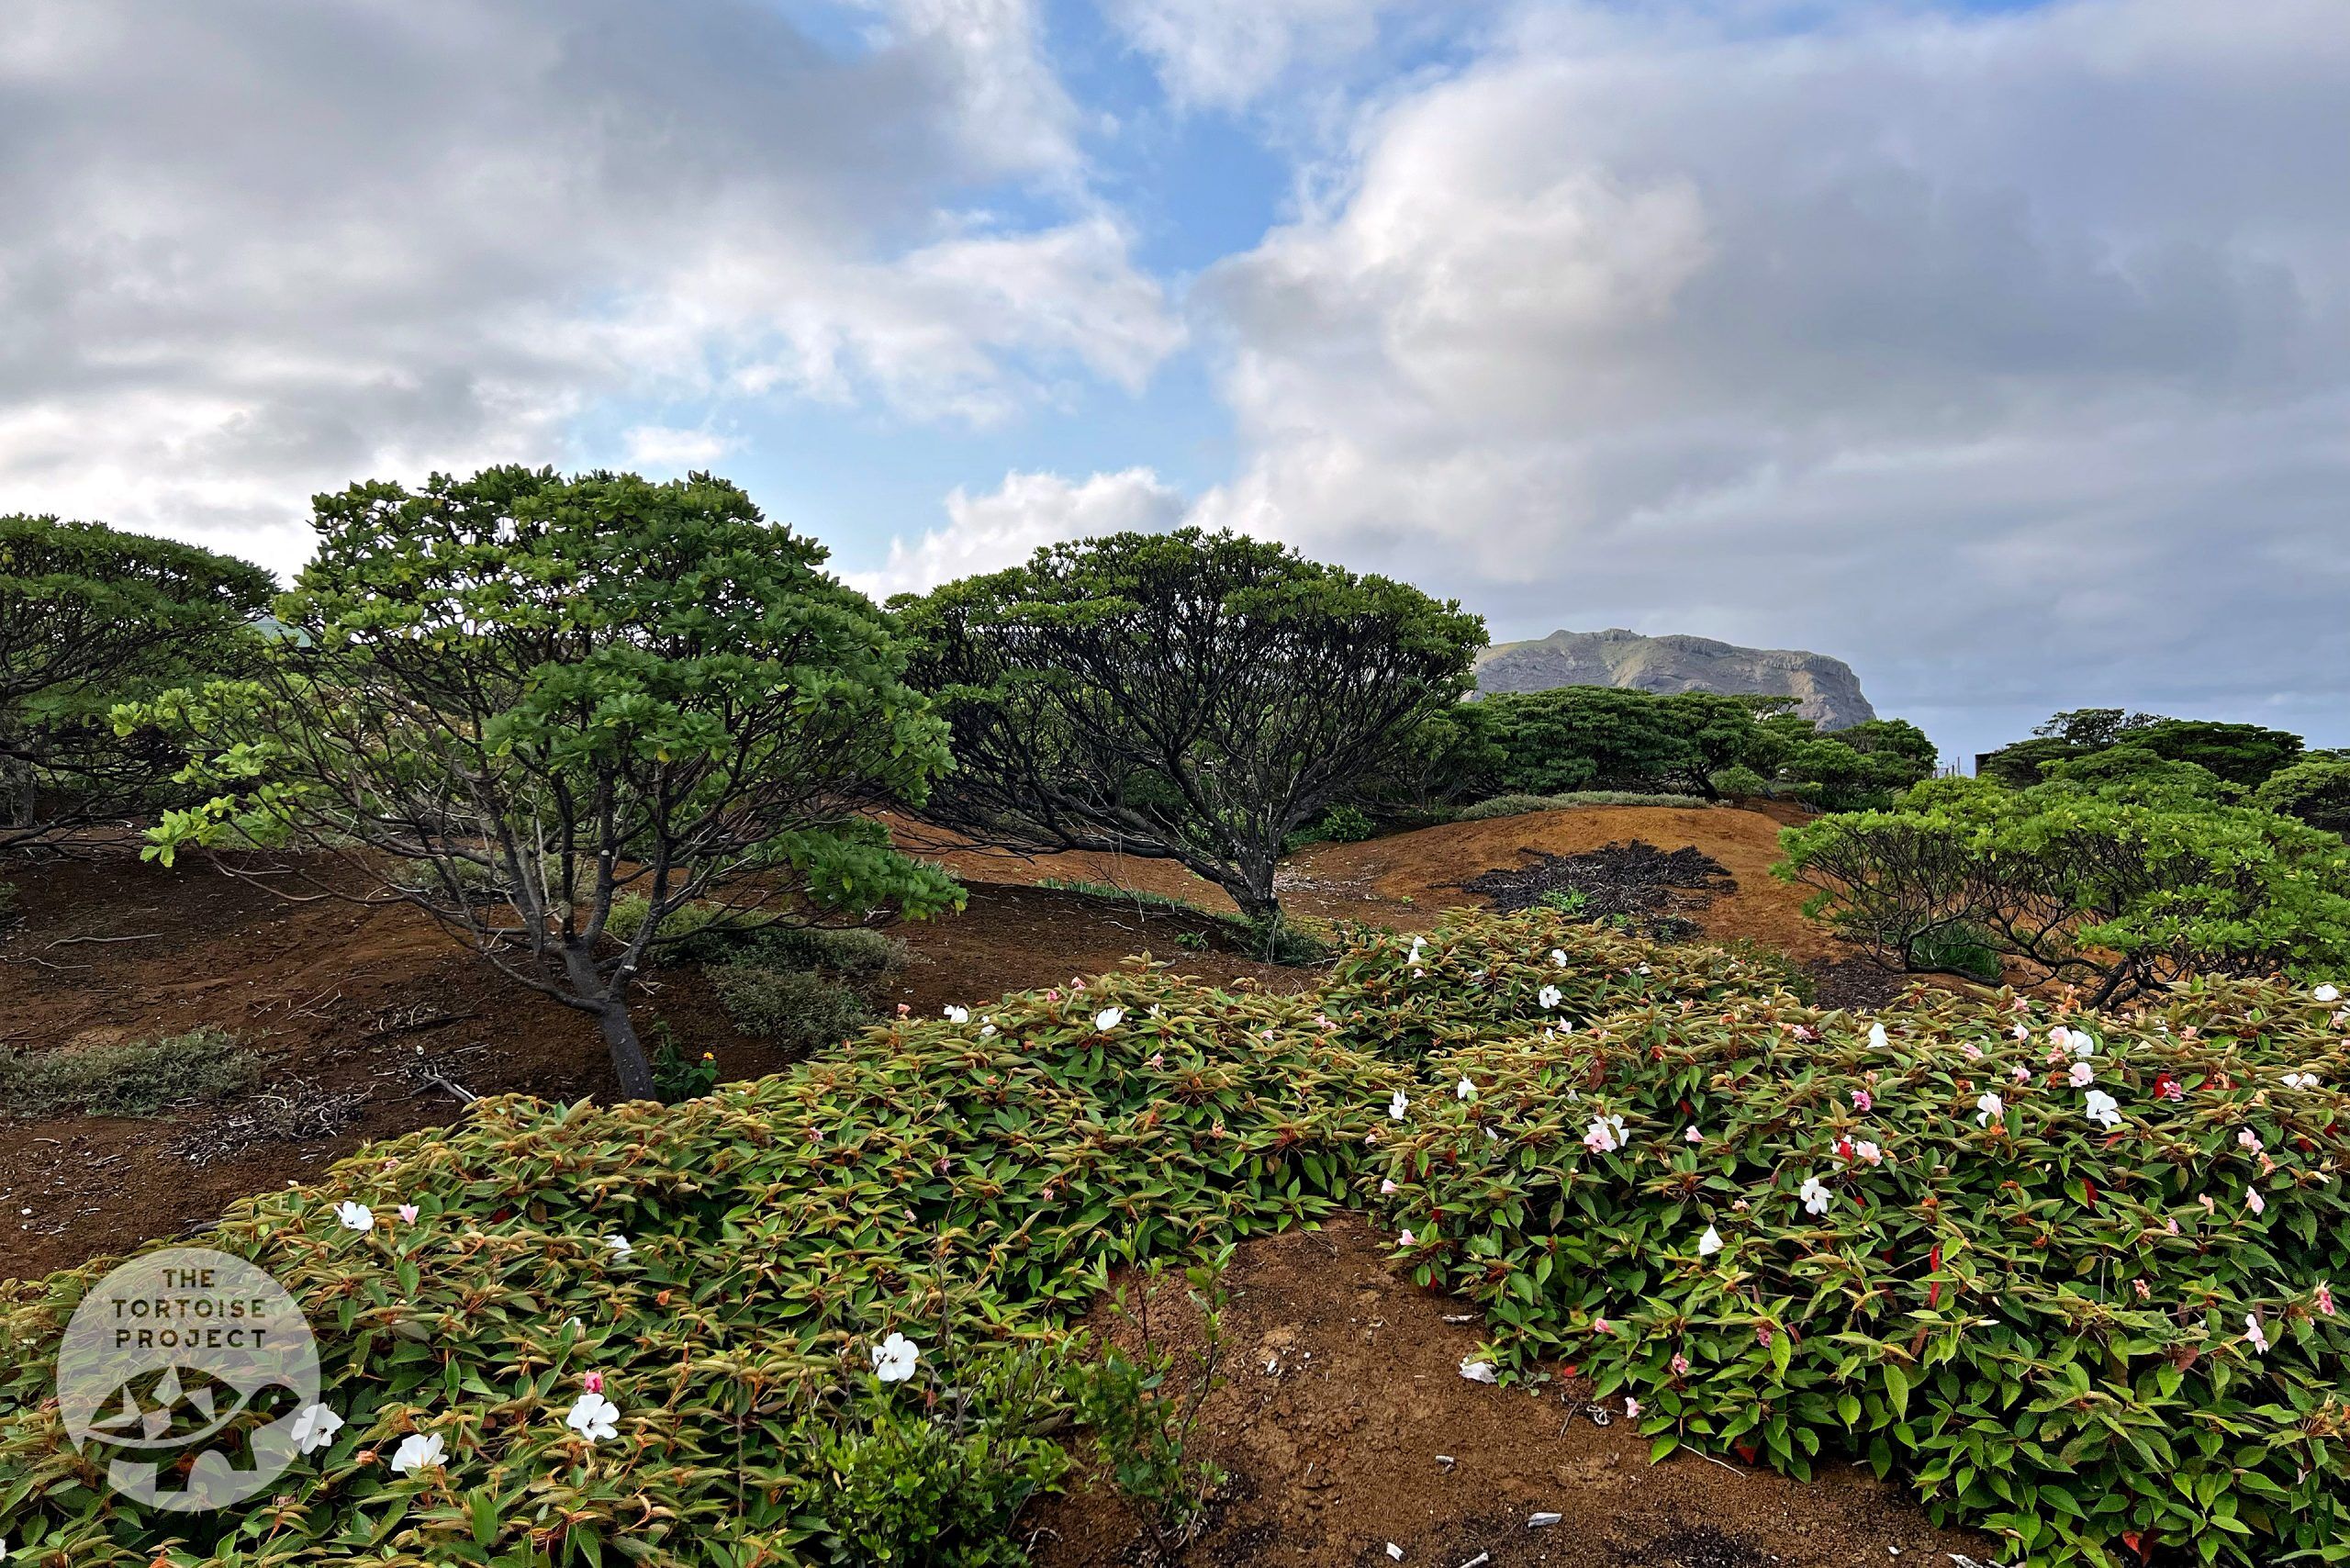 Saint Helena's "Millennium Forest" provides a glimpse of the island restored.